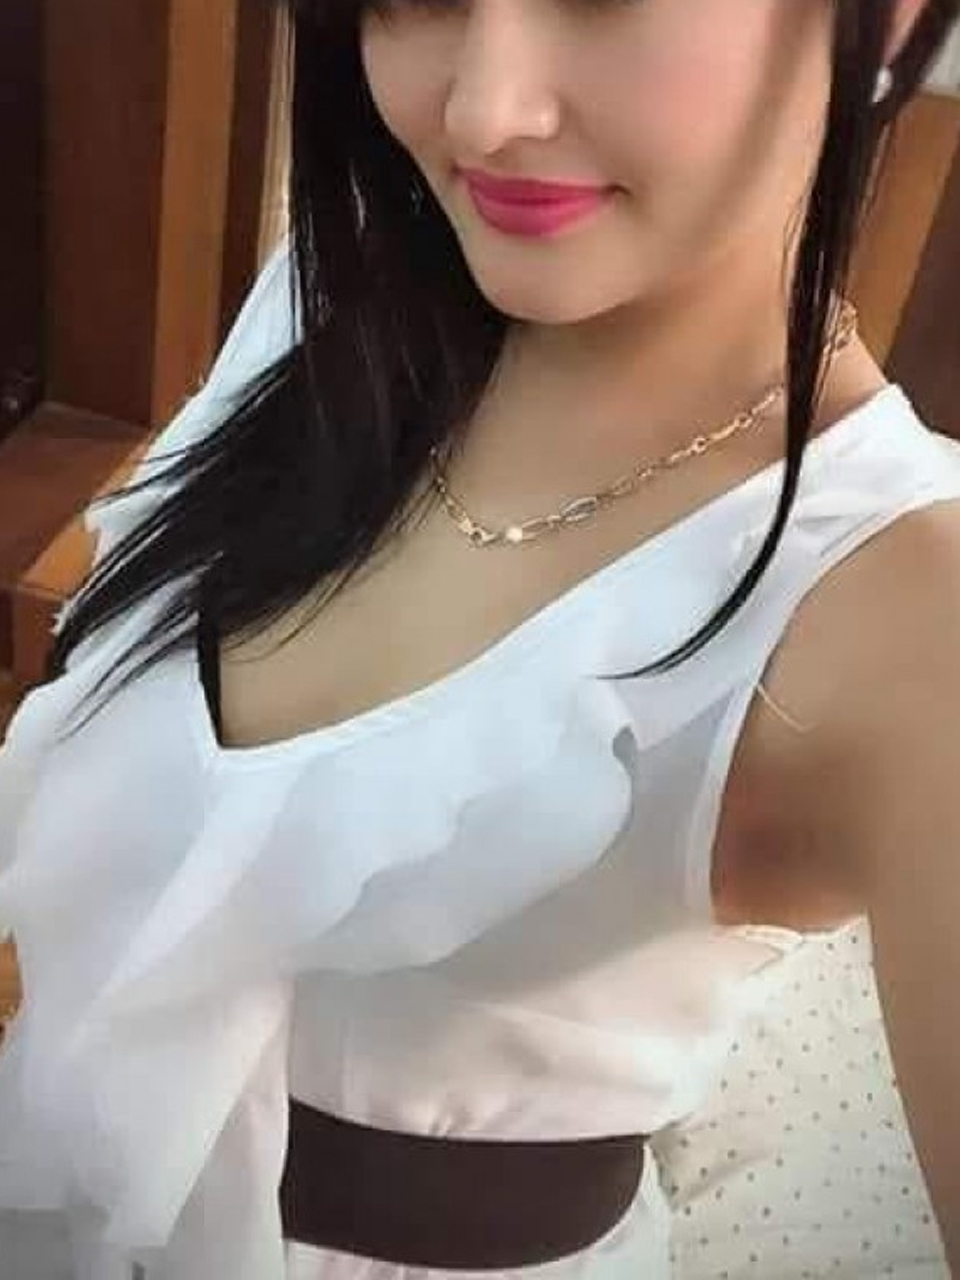 Call Girls Number in Pune